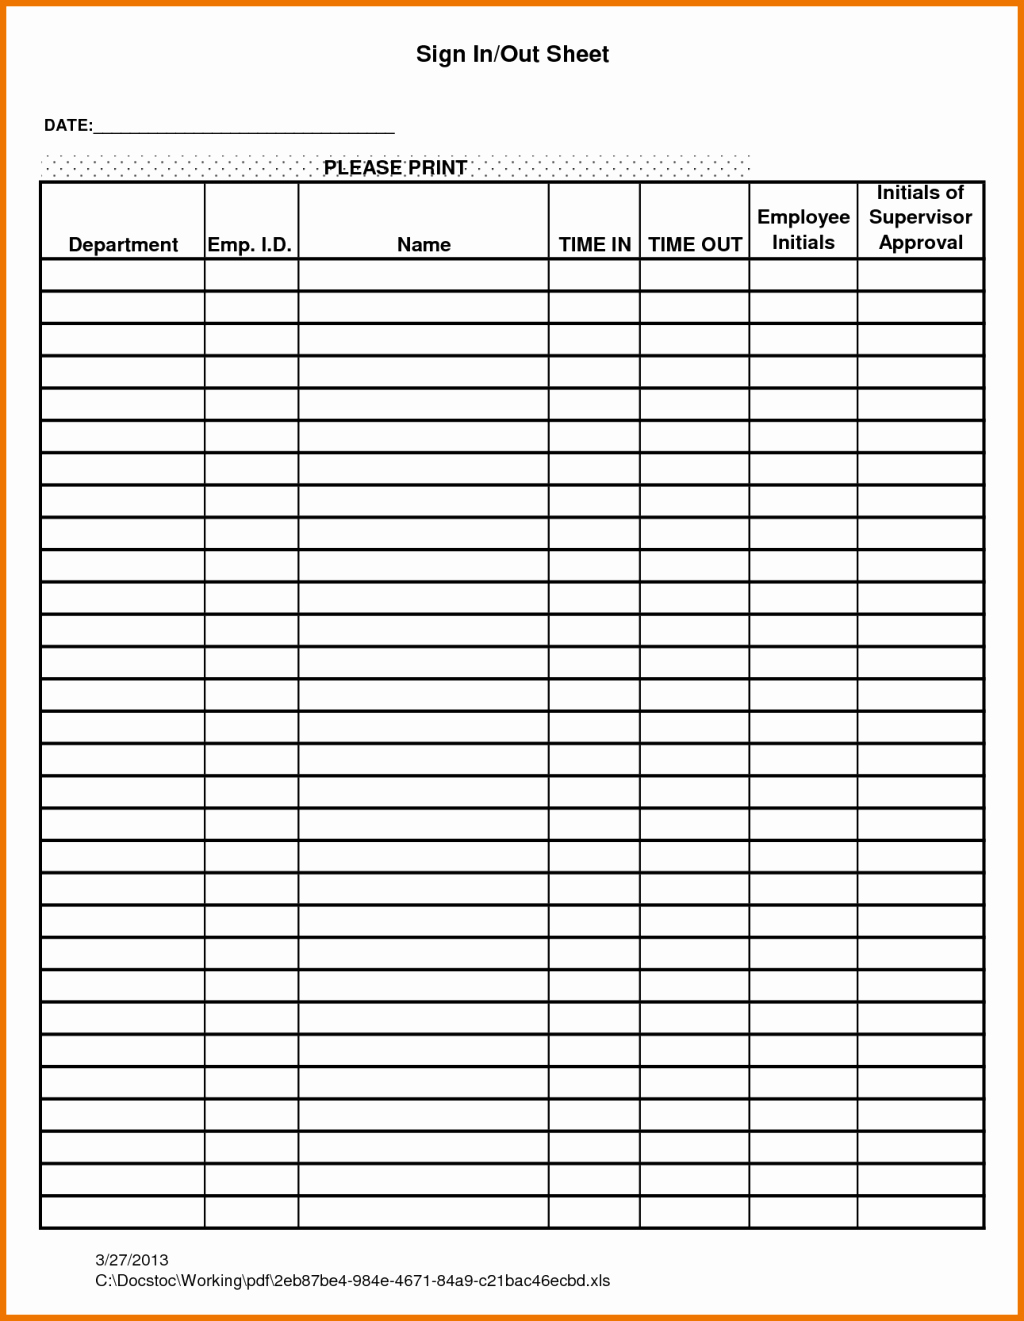 Staff Sign In Sheet Template Lovely Interesting Employee attendance Sign In Sheet with